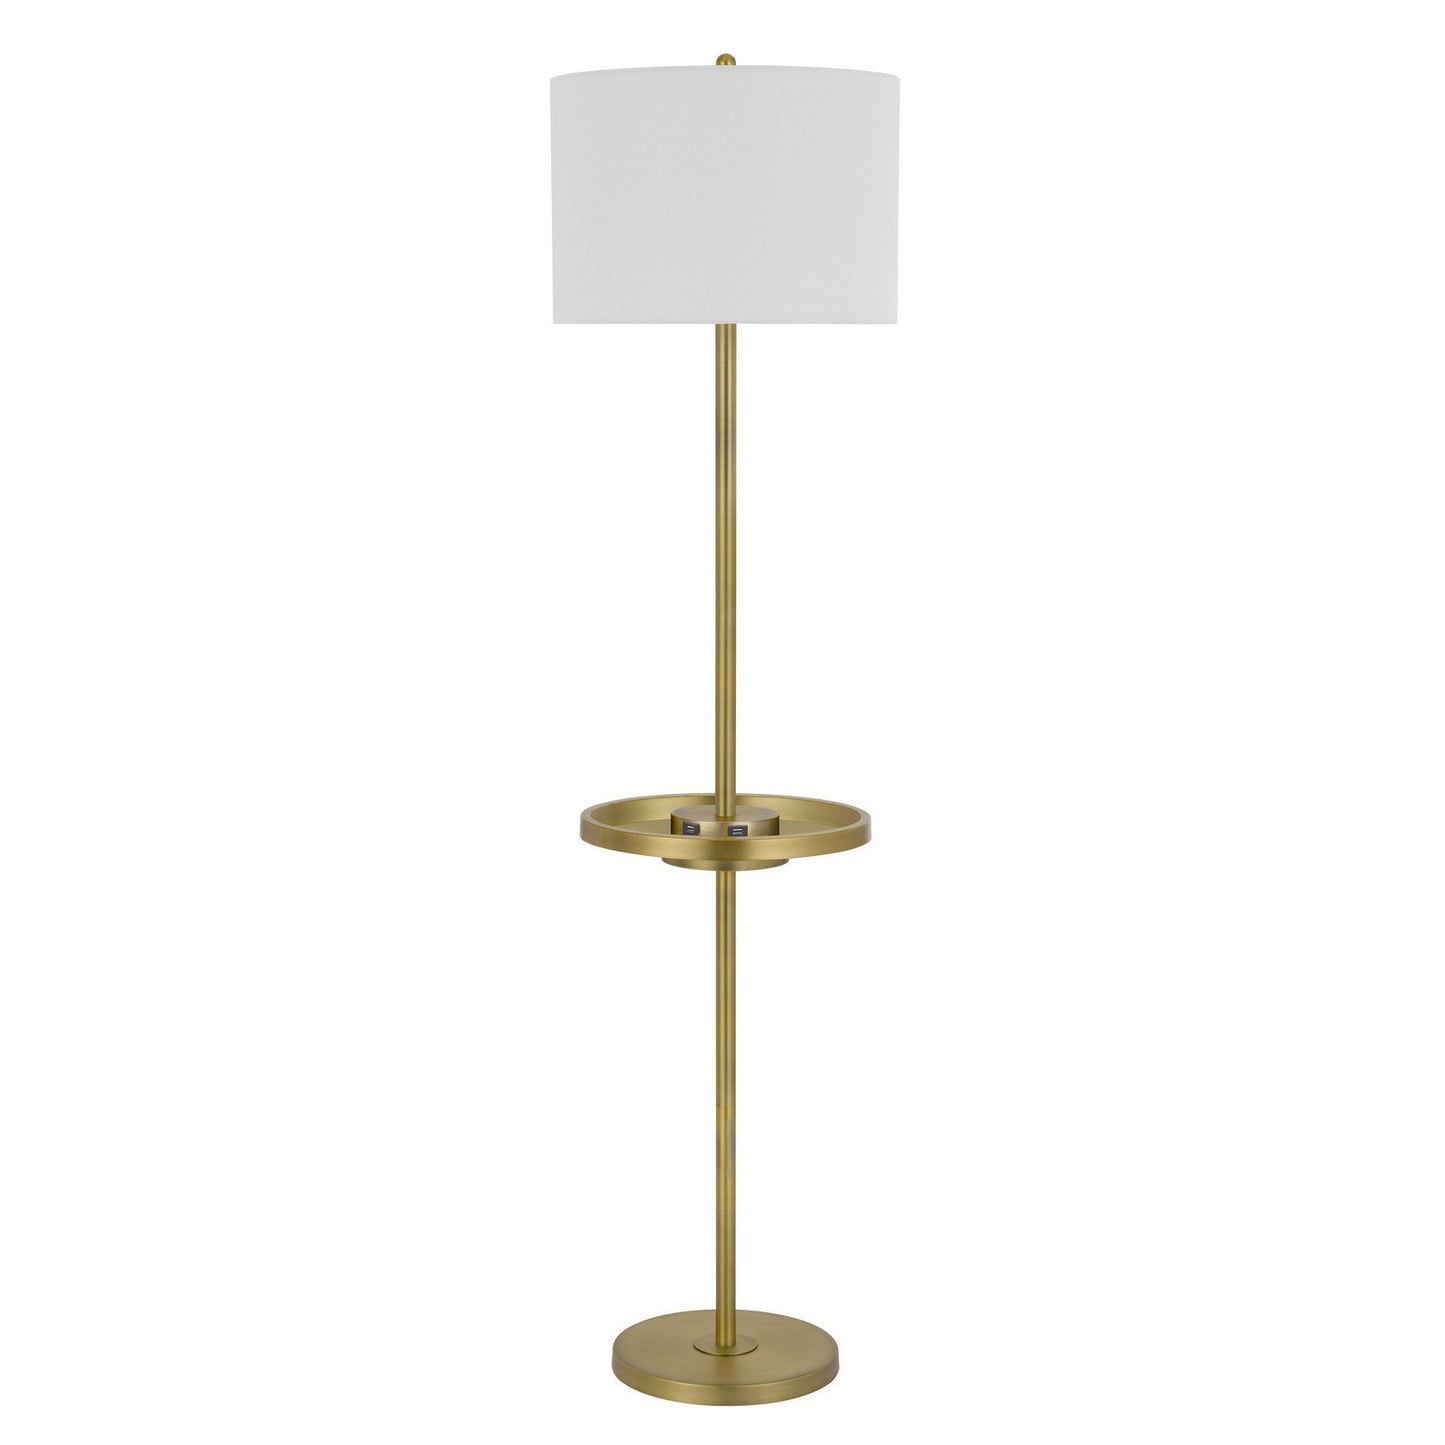 62" Nickel Tray Table Floor Lamp With White Drum Shade